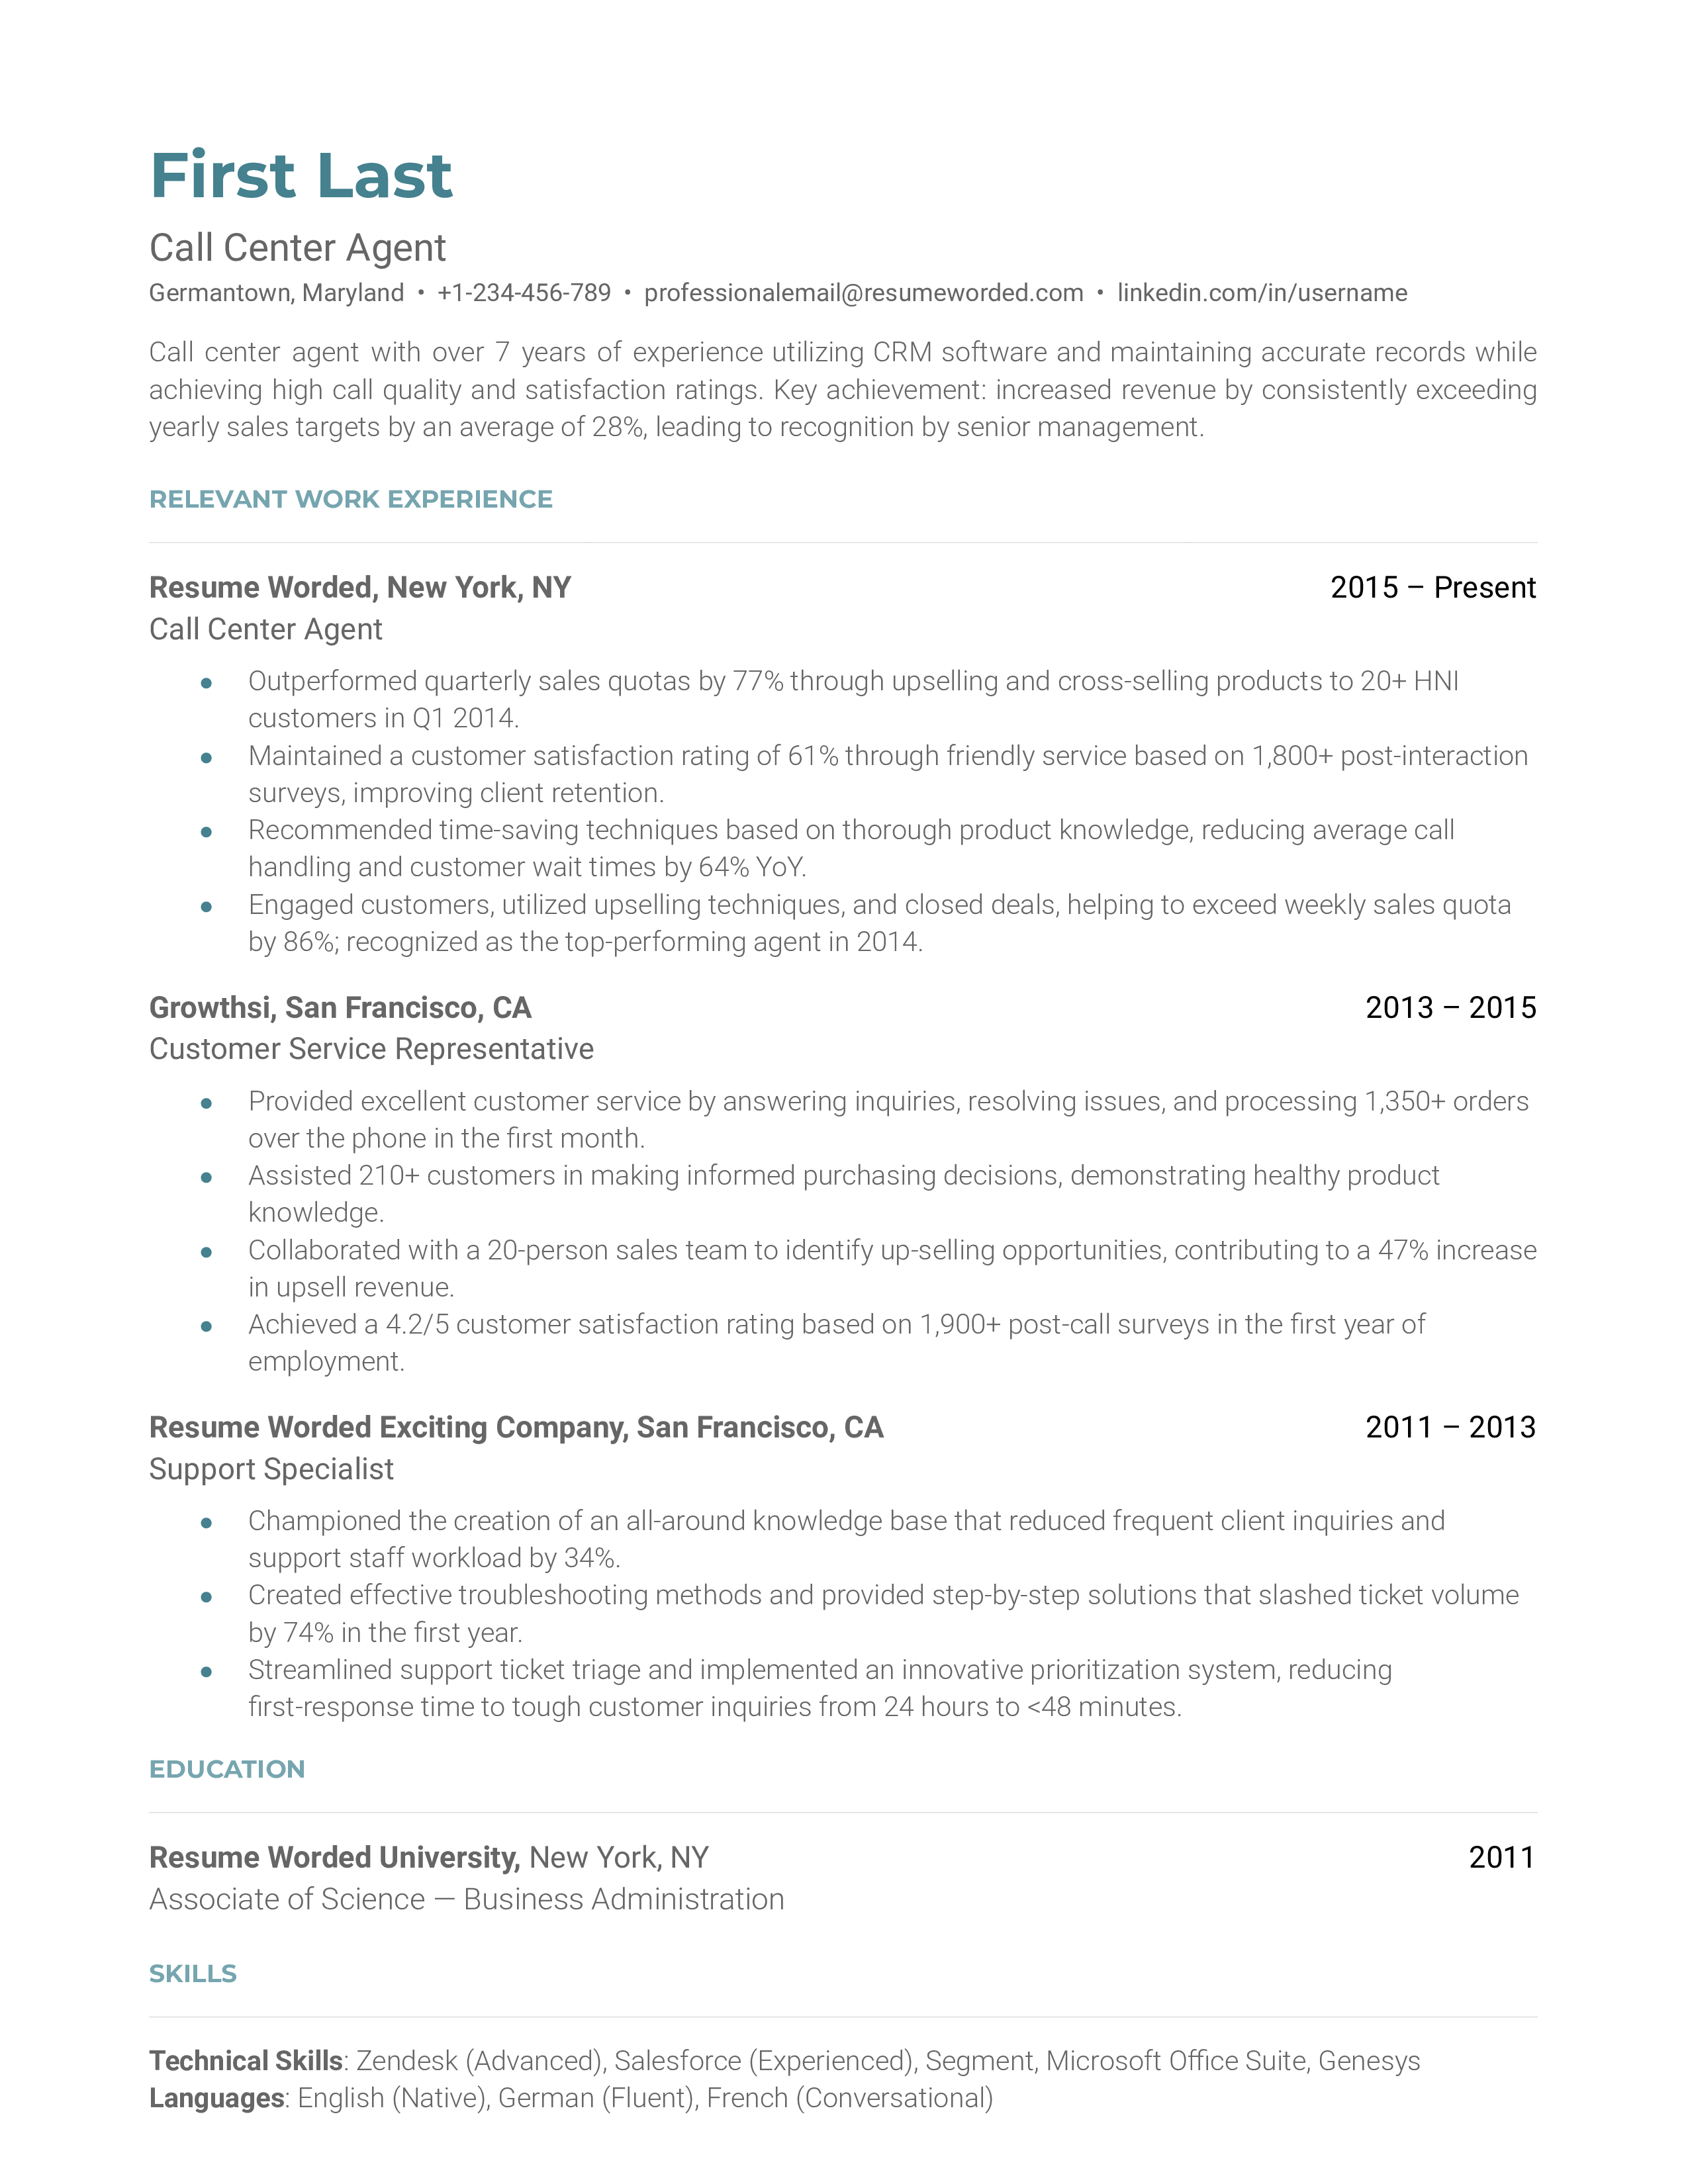 A properly formatted CV for a Call Center Agent position